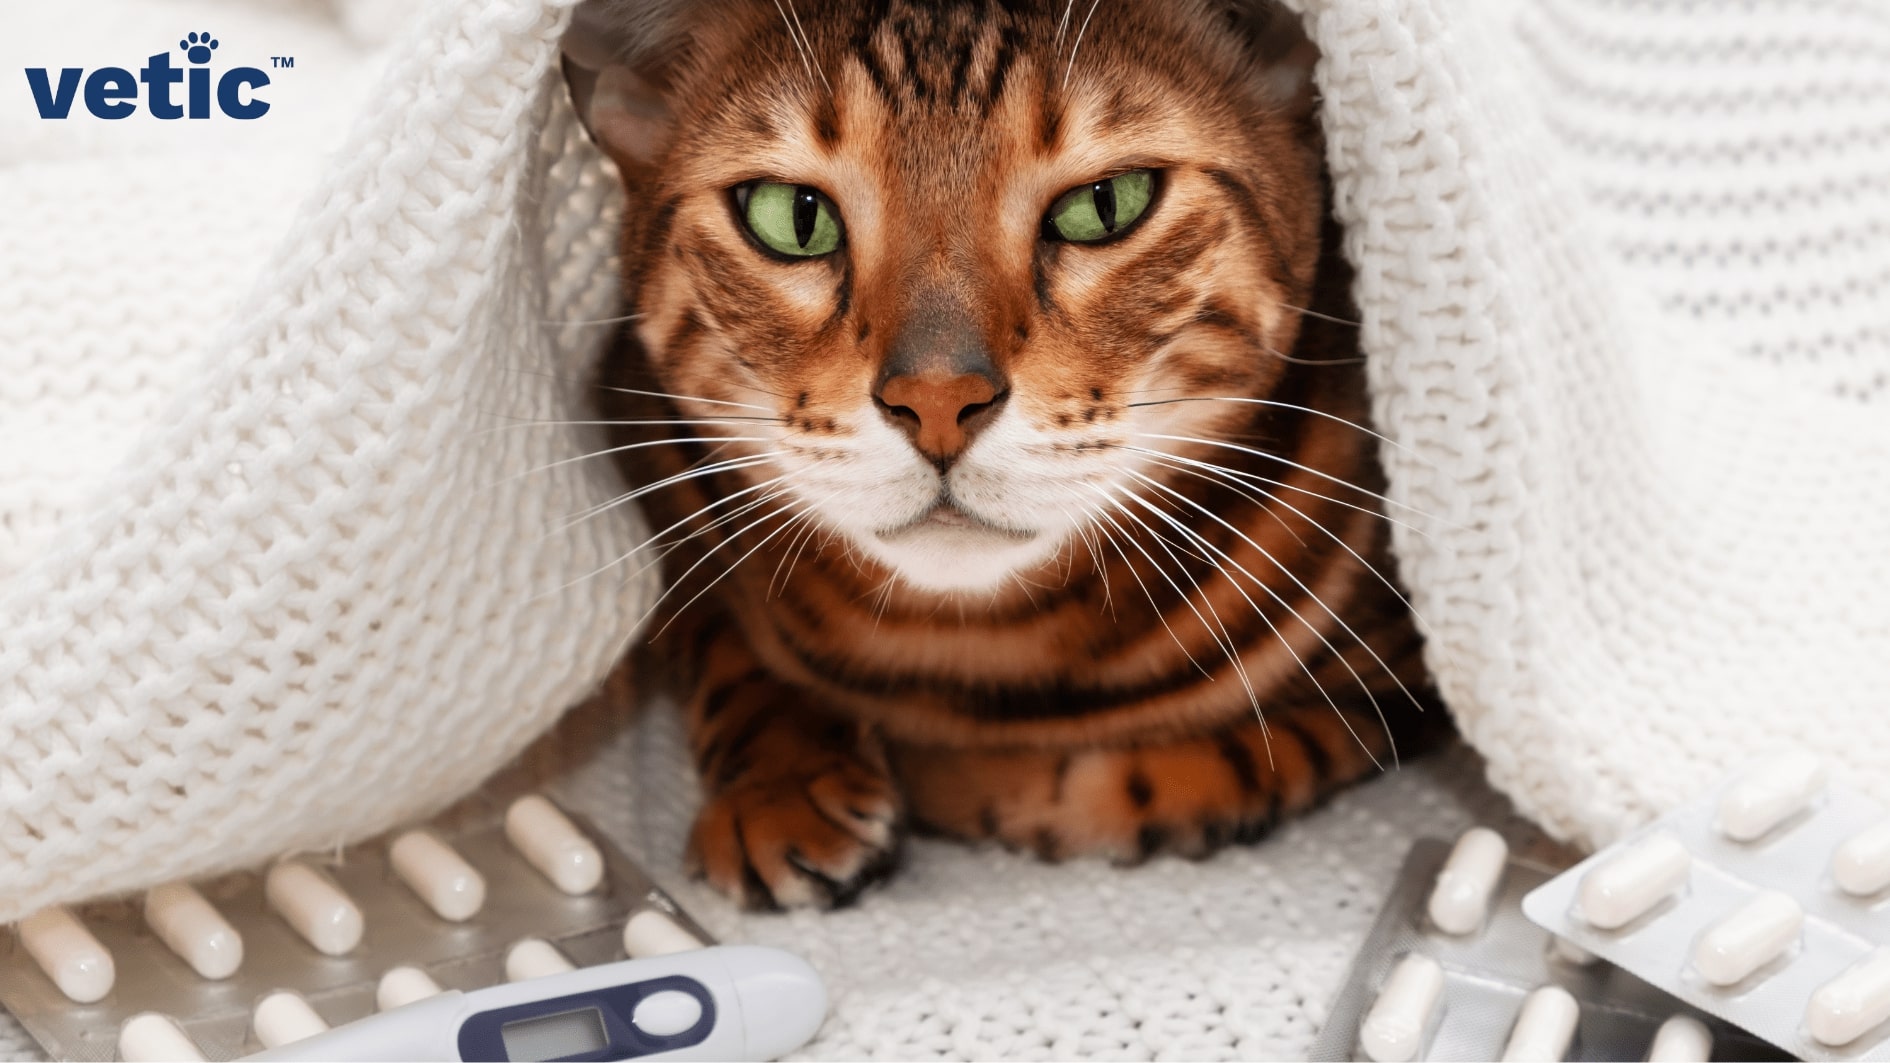 Marbled tabby under a white crochet blanket with thermometer and pills strewn in front